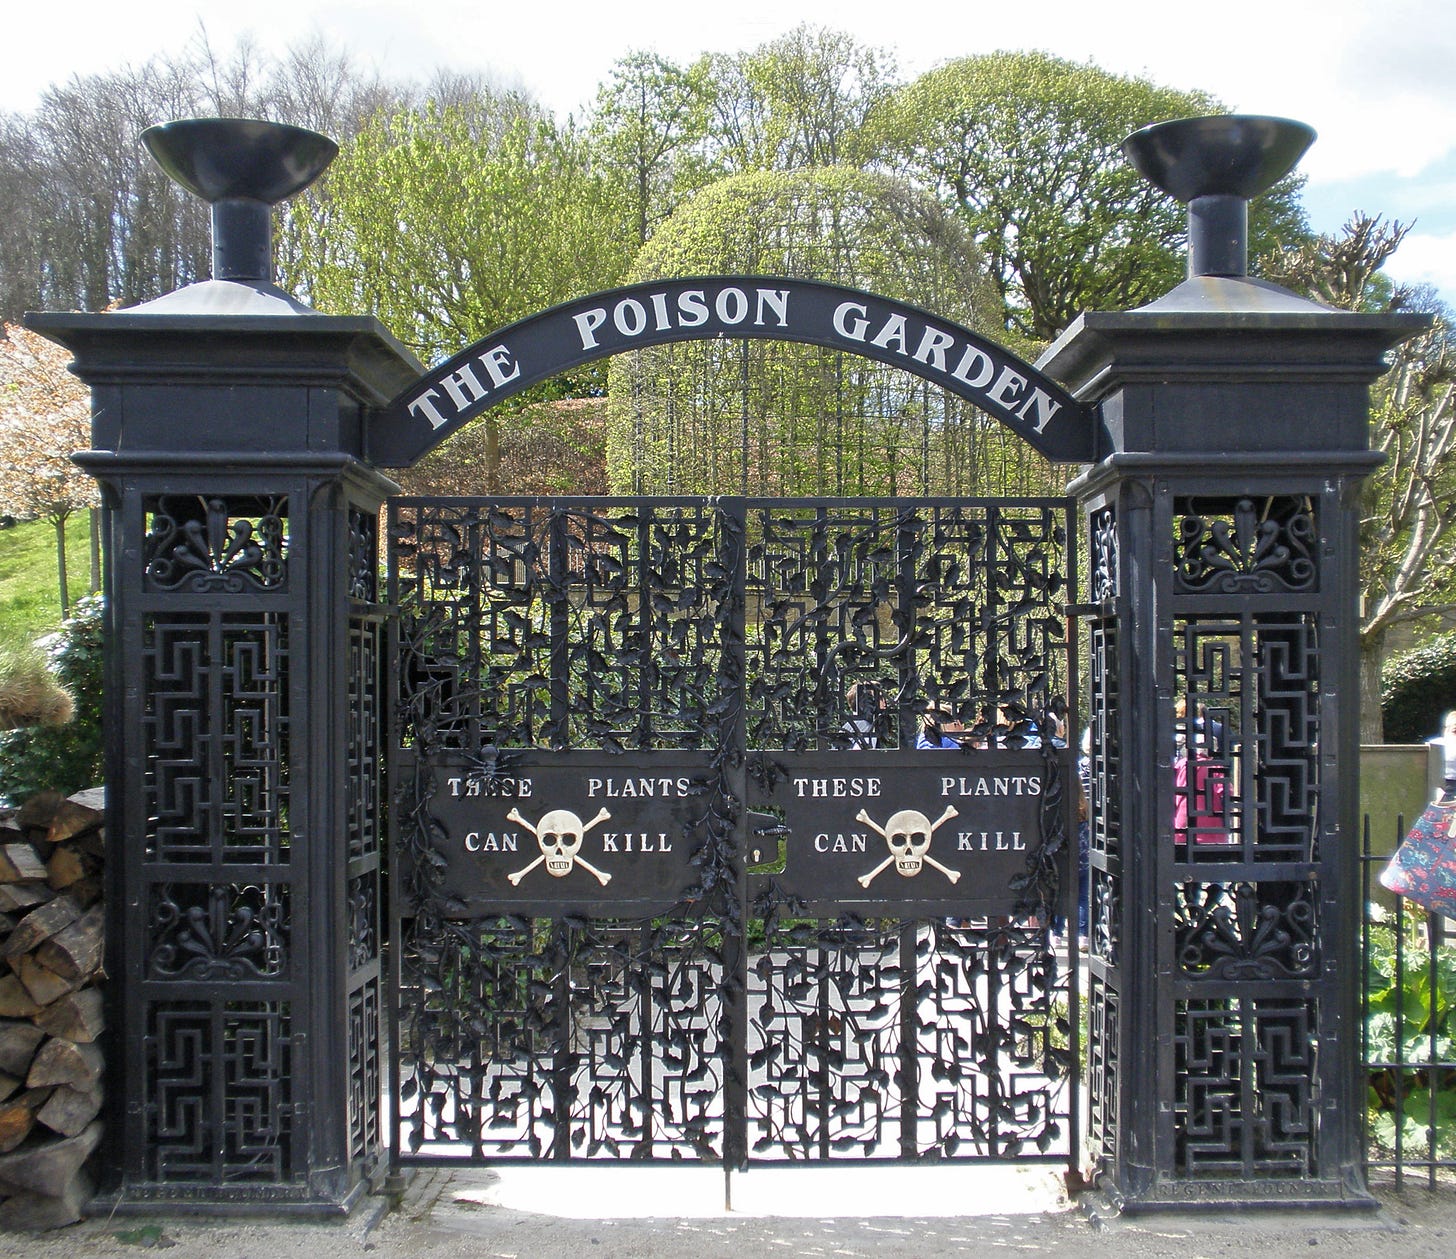 Black geometric gates, with signs that have a skull and crossbones on them stating these plants can kill. Behind the gates, a very green garden can be glimpsed